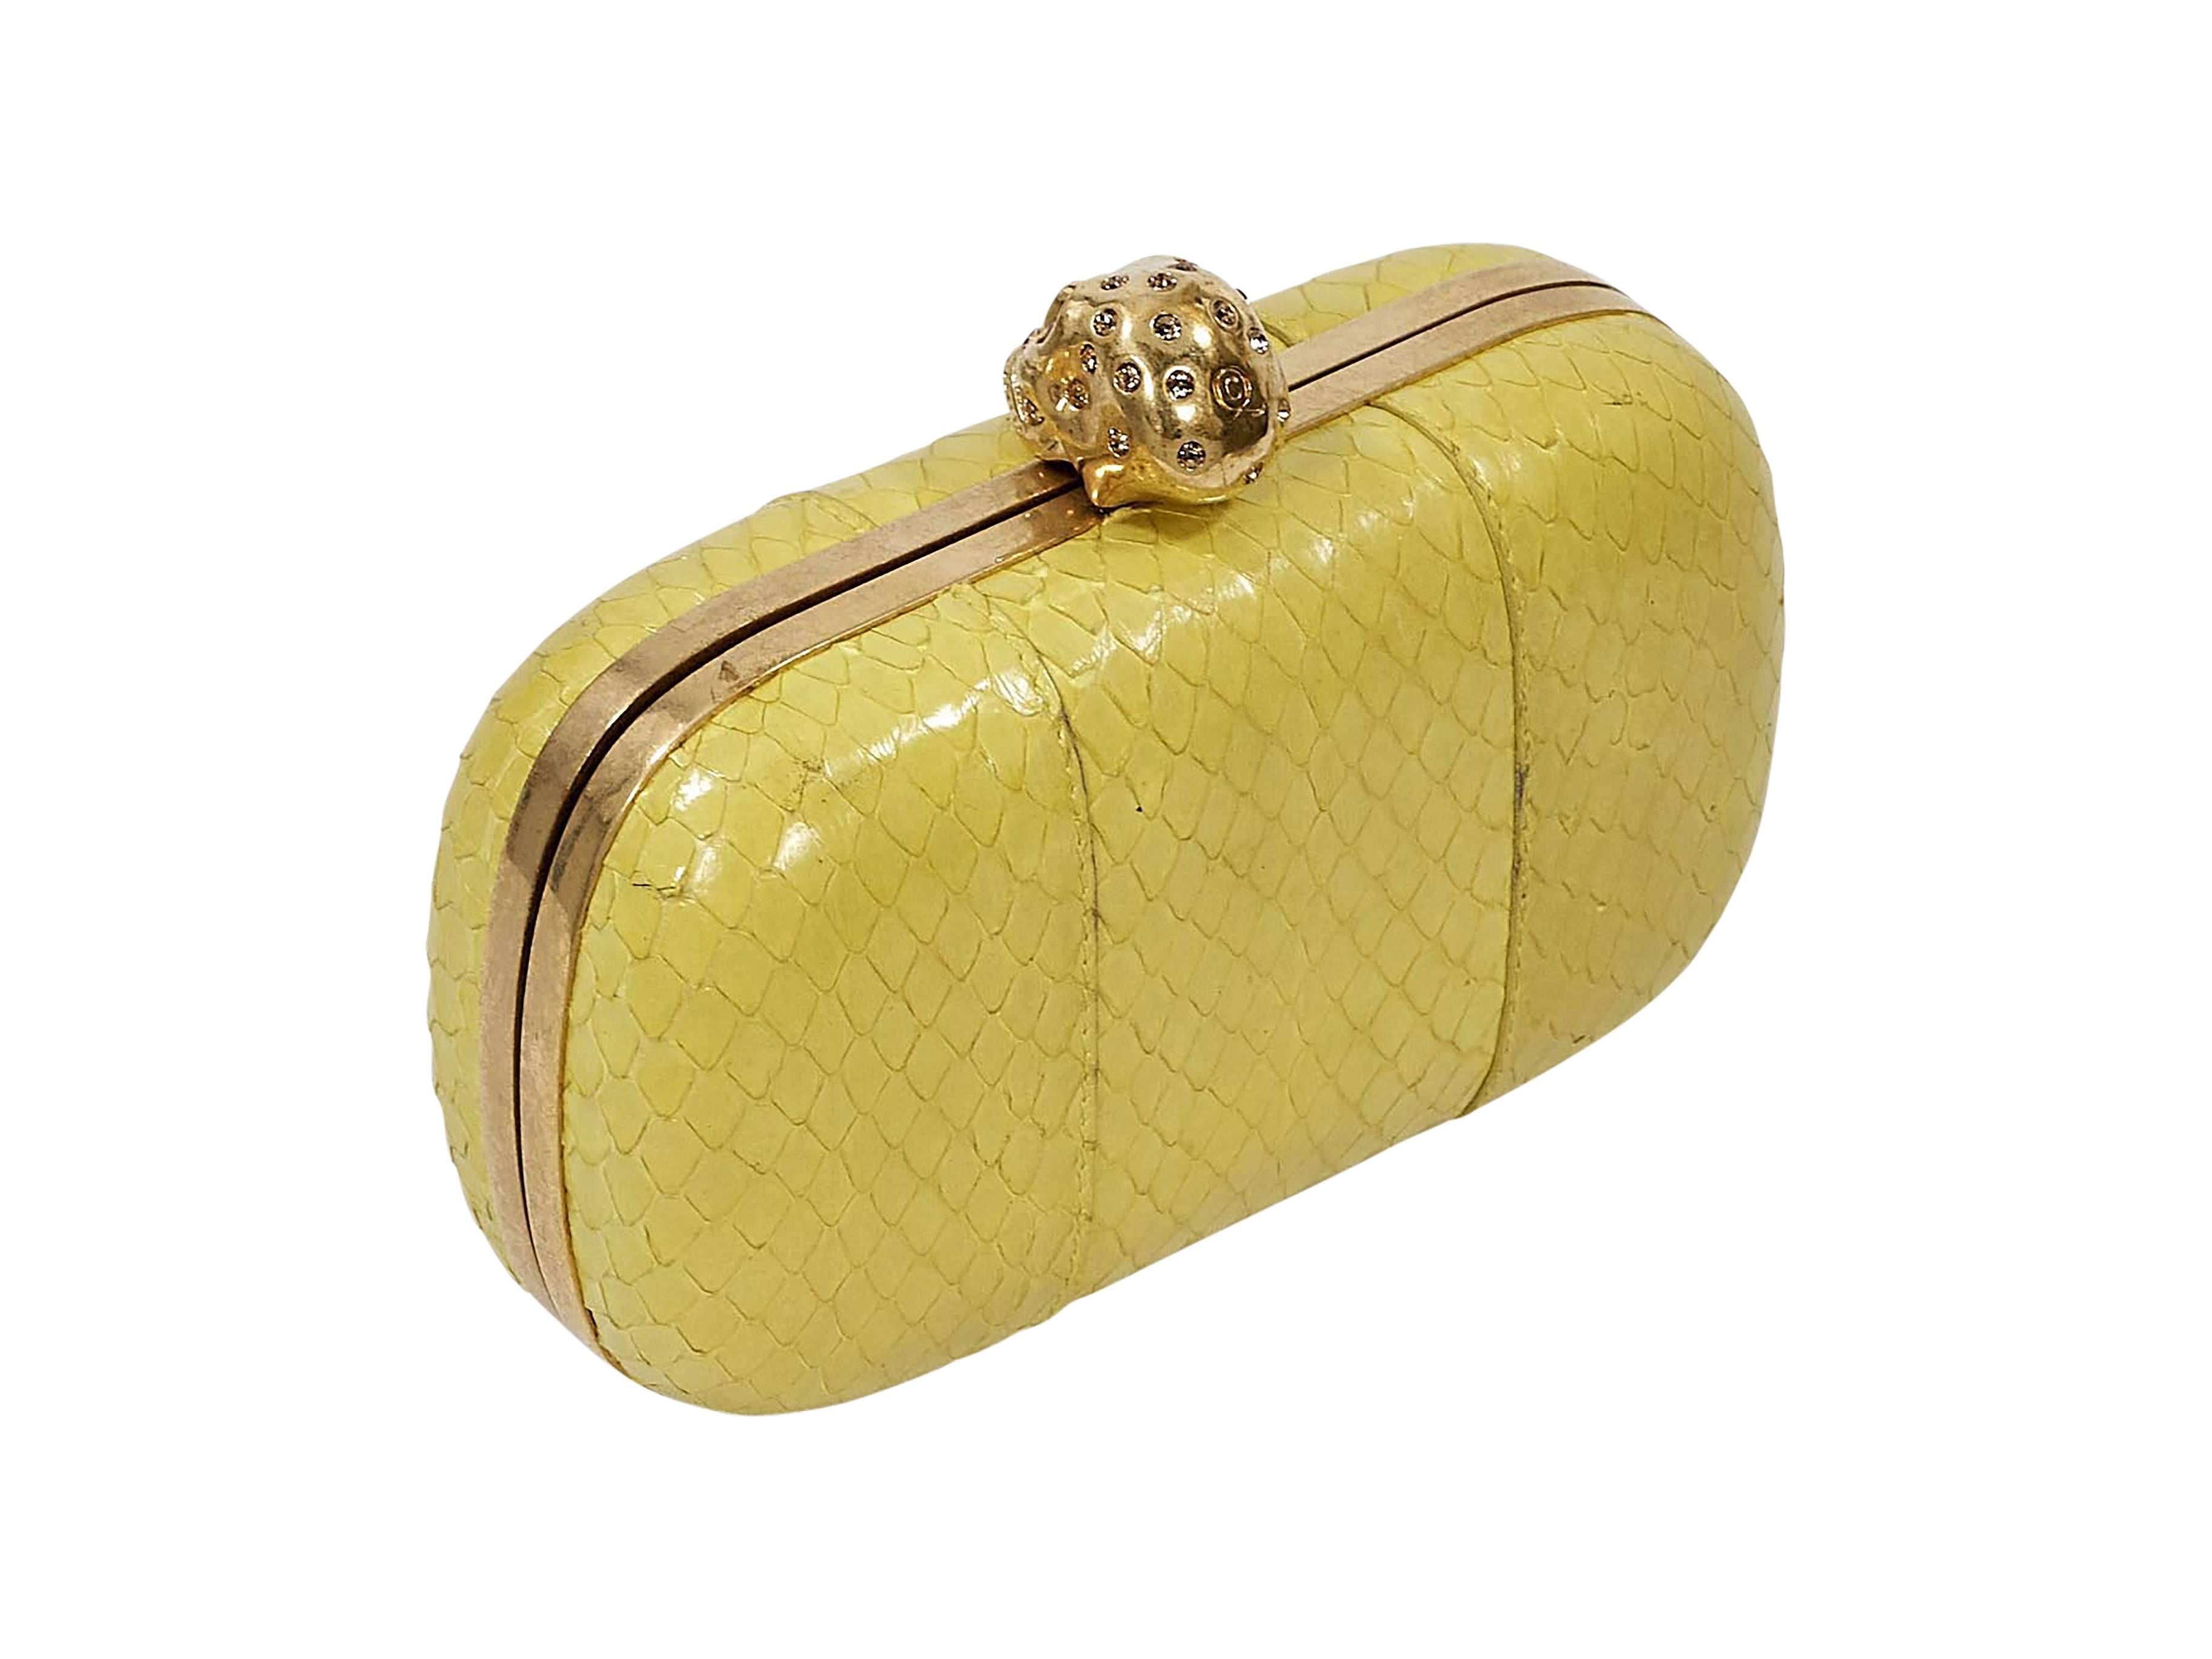 Product details:  Yellow small box clutch by Alexander McQueen.  Embellished skull push-lock closure.  Lined interior.  Gold-tone hardware.  6.5"L x 3.5"H x 2.25"D.
Condition: Pre-owned. Good.  Exterior scratches and pen marks. 

Est.